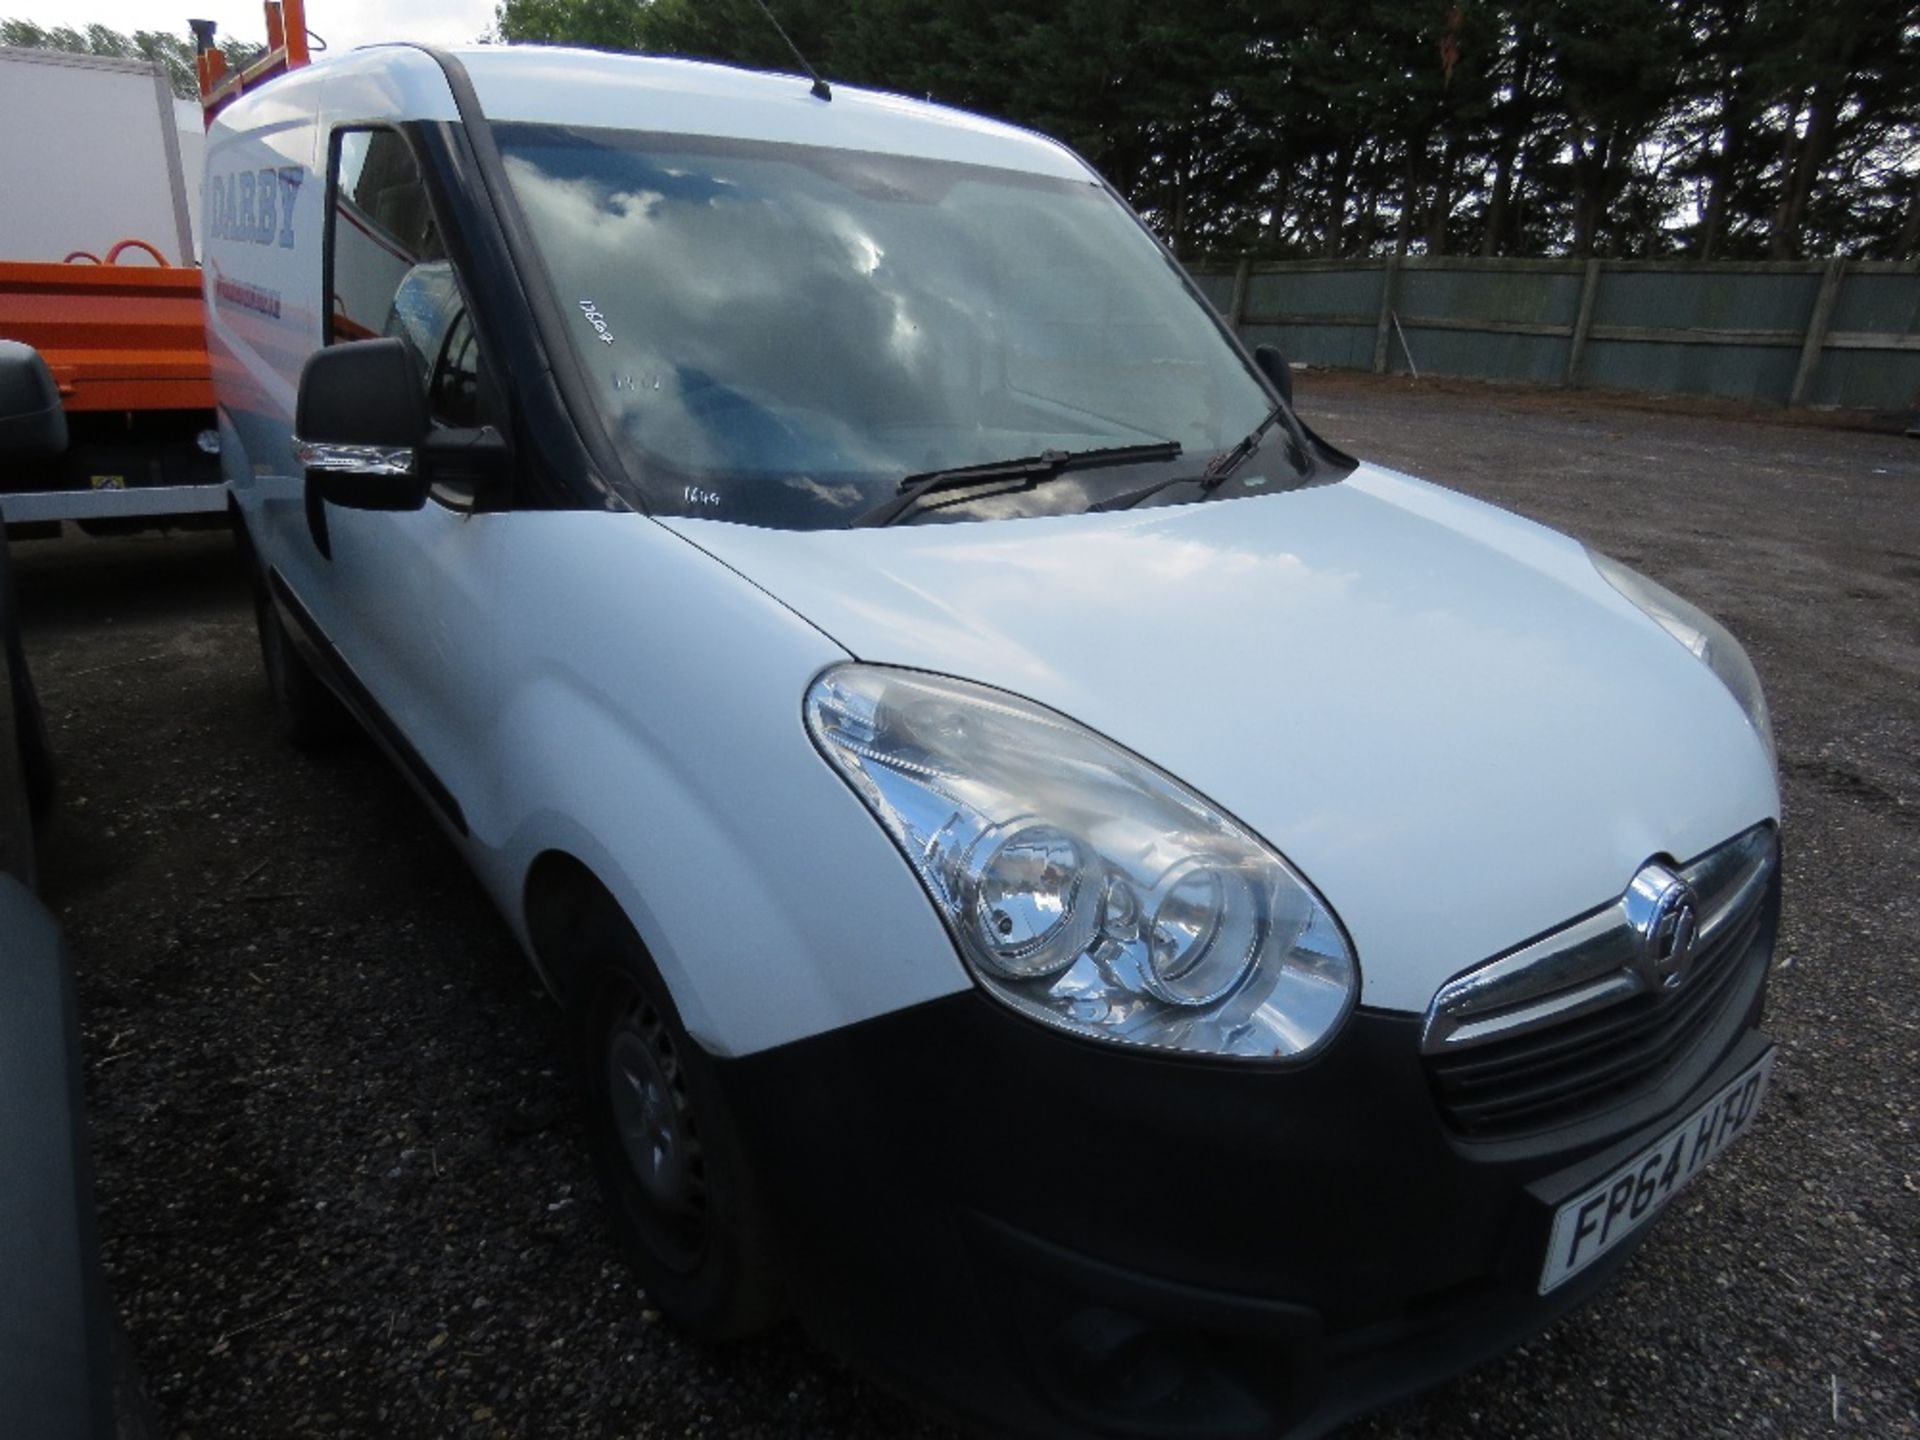 VAUXHALL COMBI PANEL VAN REG: FP64 HTD WITH V5, TESTED UNTIL 30TH OCTOBER 2022. ONE OWNER, OWNED FRO